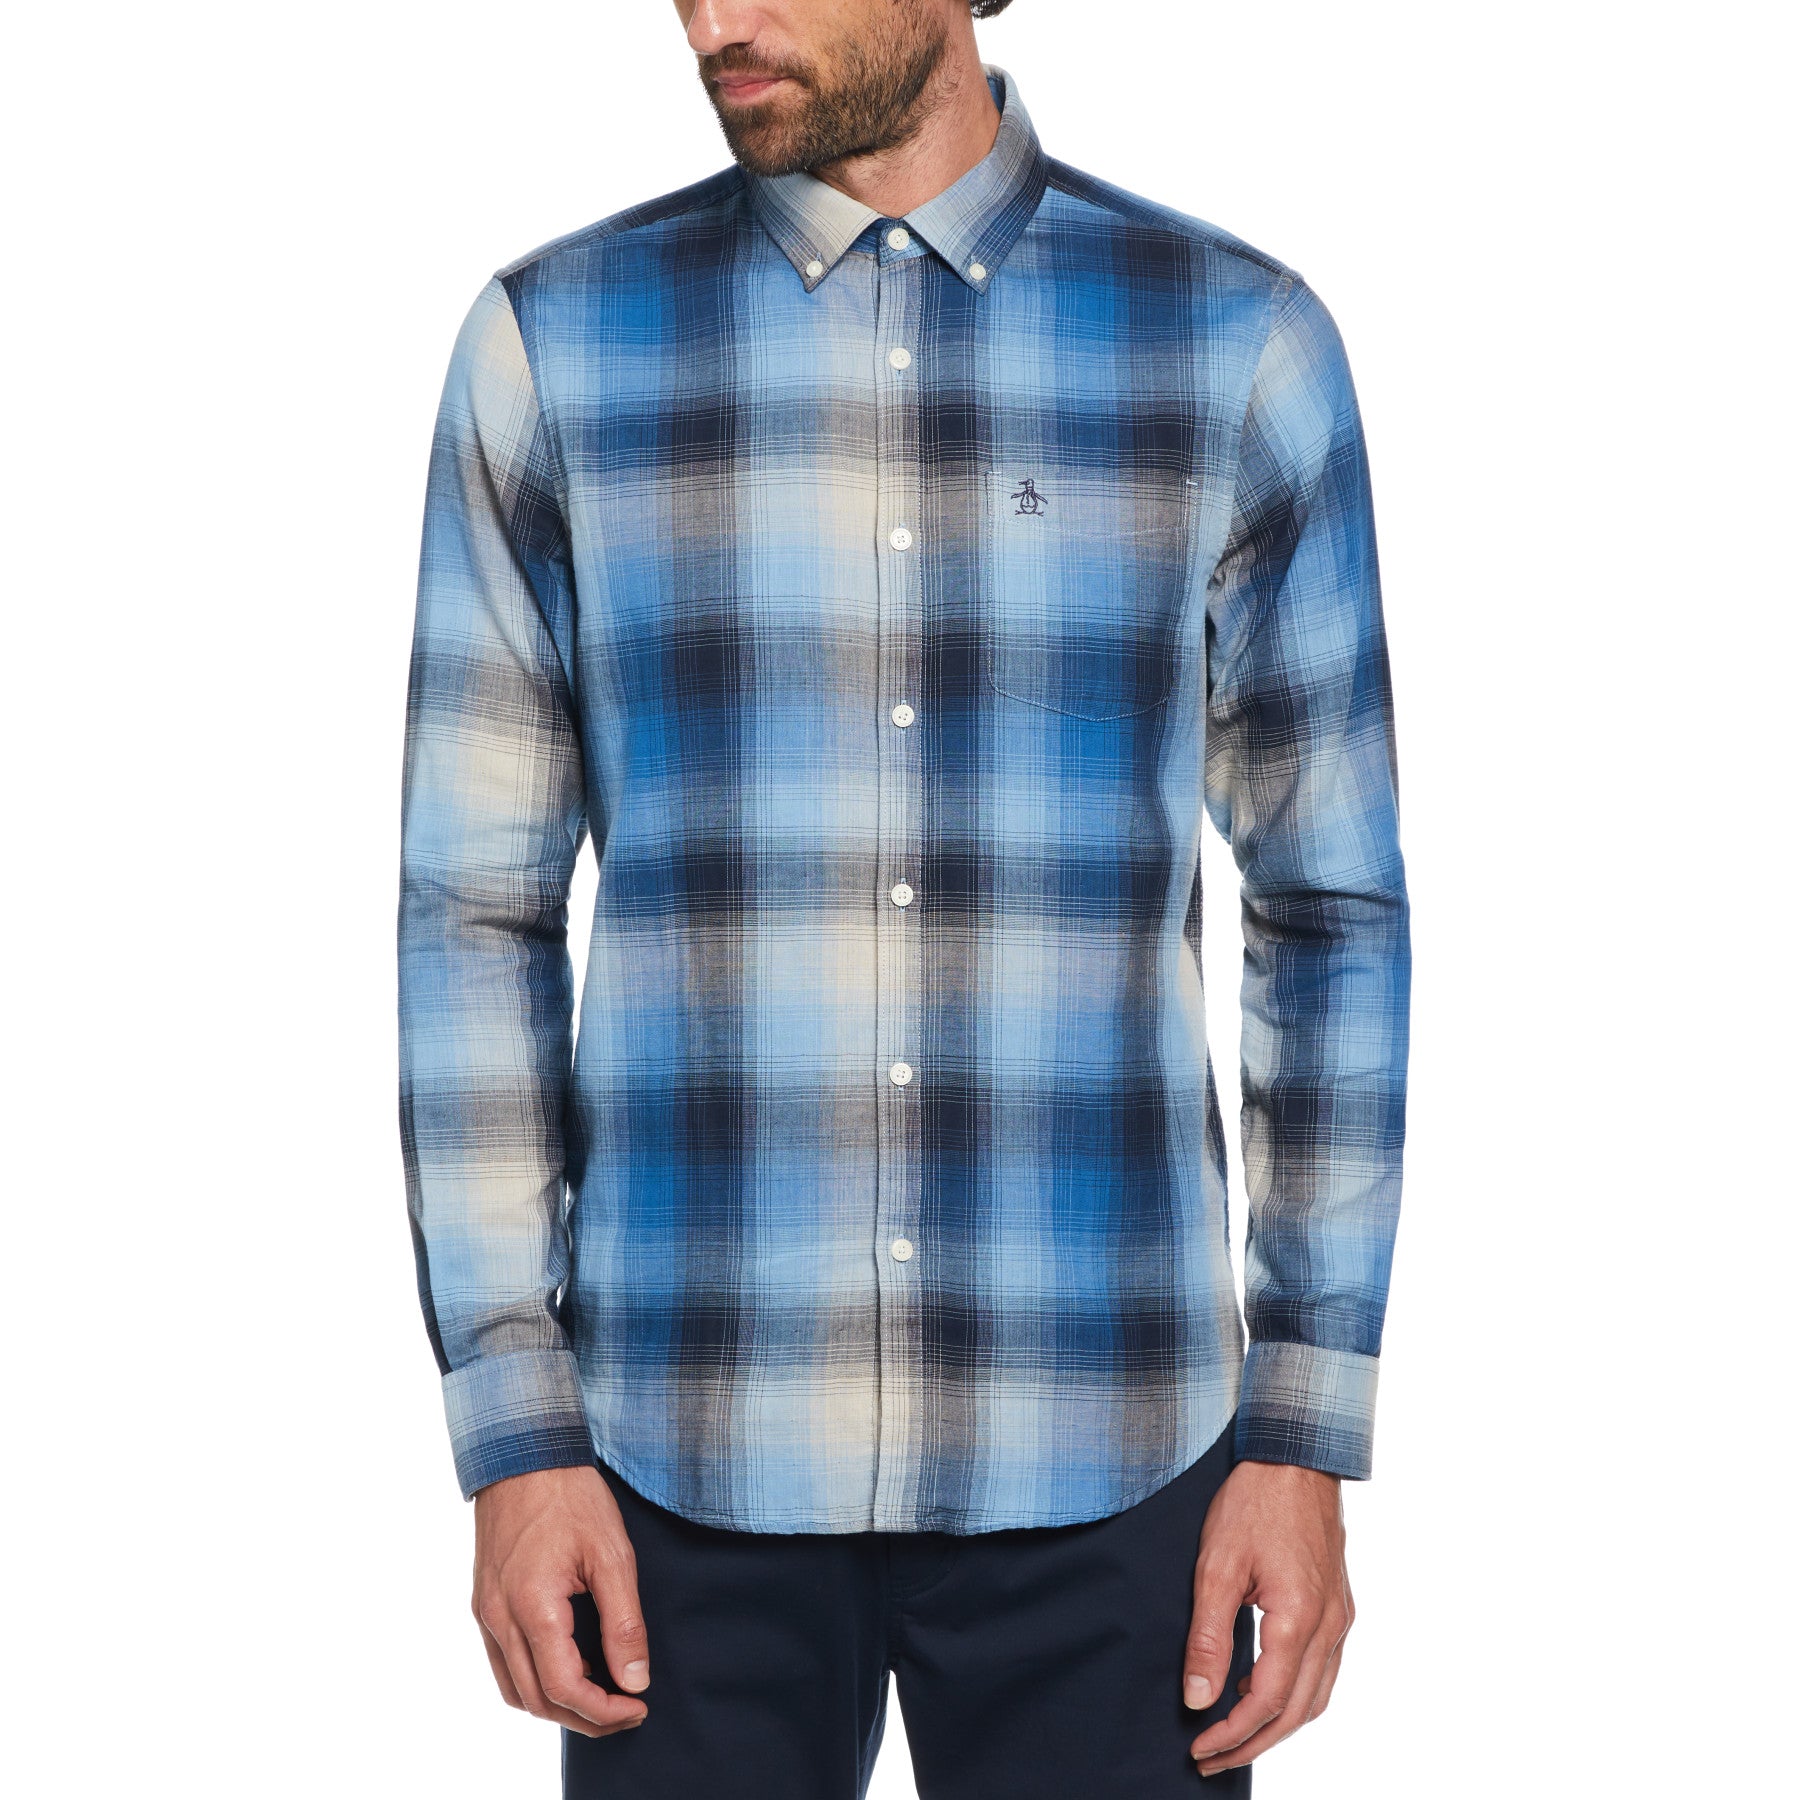 View Double Weave Plaid Pattern Shirt In Azure Blue information